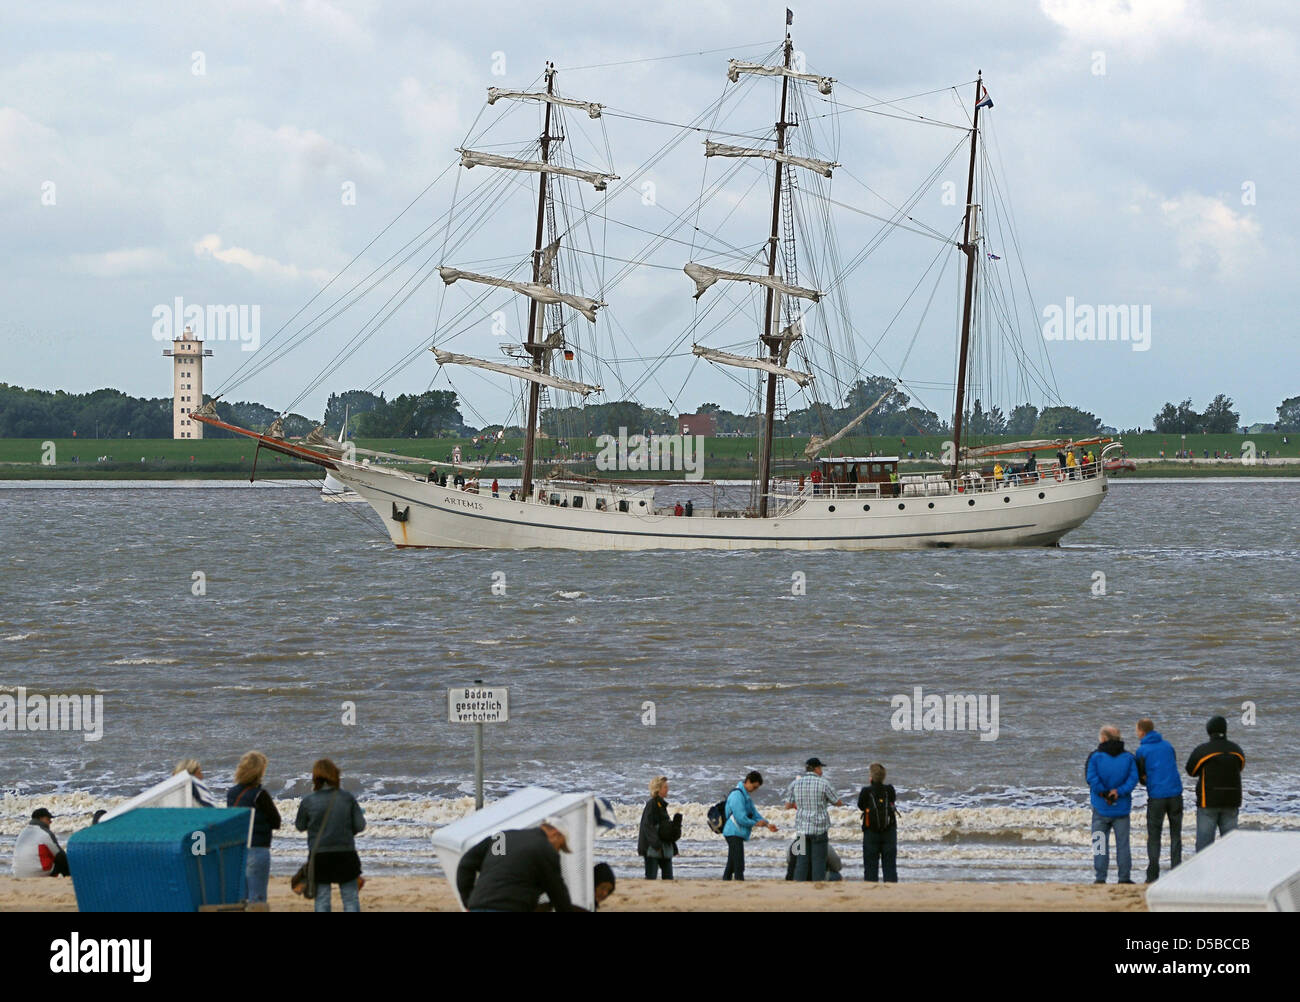 The Dutch barque 'Artemis' arrives for the parade during the Windjammer festival 'Sail 2010' in Bremerhaven, Germany, 25 August 2010. More than 200 ships from 15 nations participate in the maritime festival (25-29 August 2010). Around one million visitors are expected for the sailing encounter in Bremerhaven. Photo: Matthias Balk Stock Photo